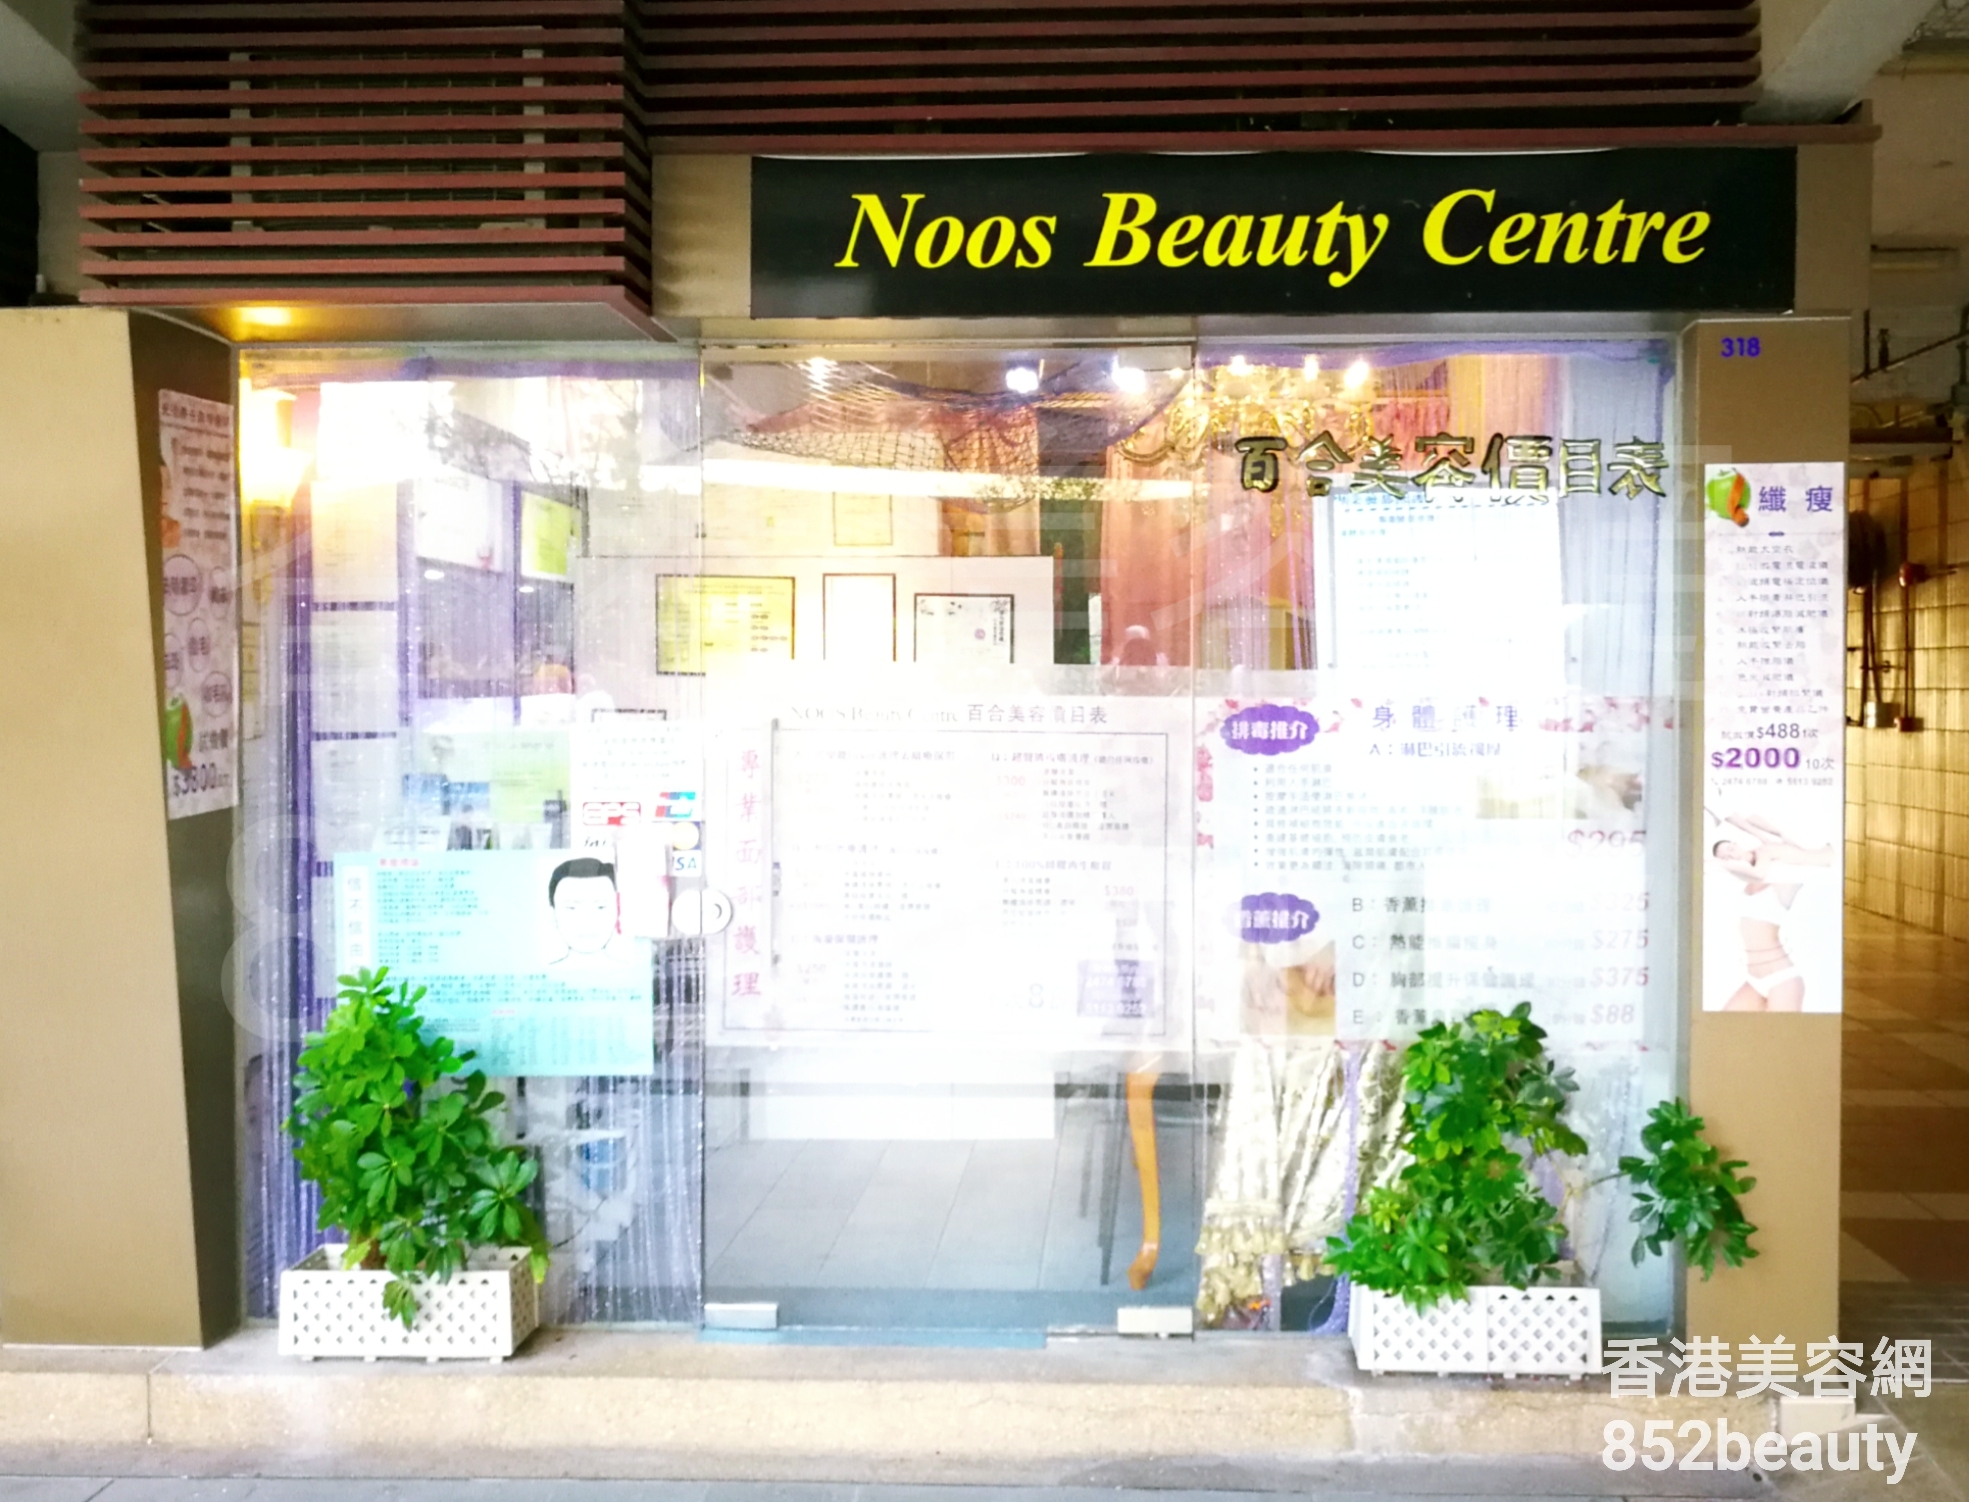 Slimming: Noos Beauty Centre